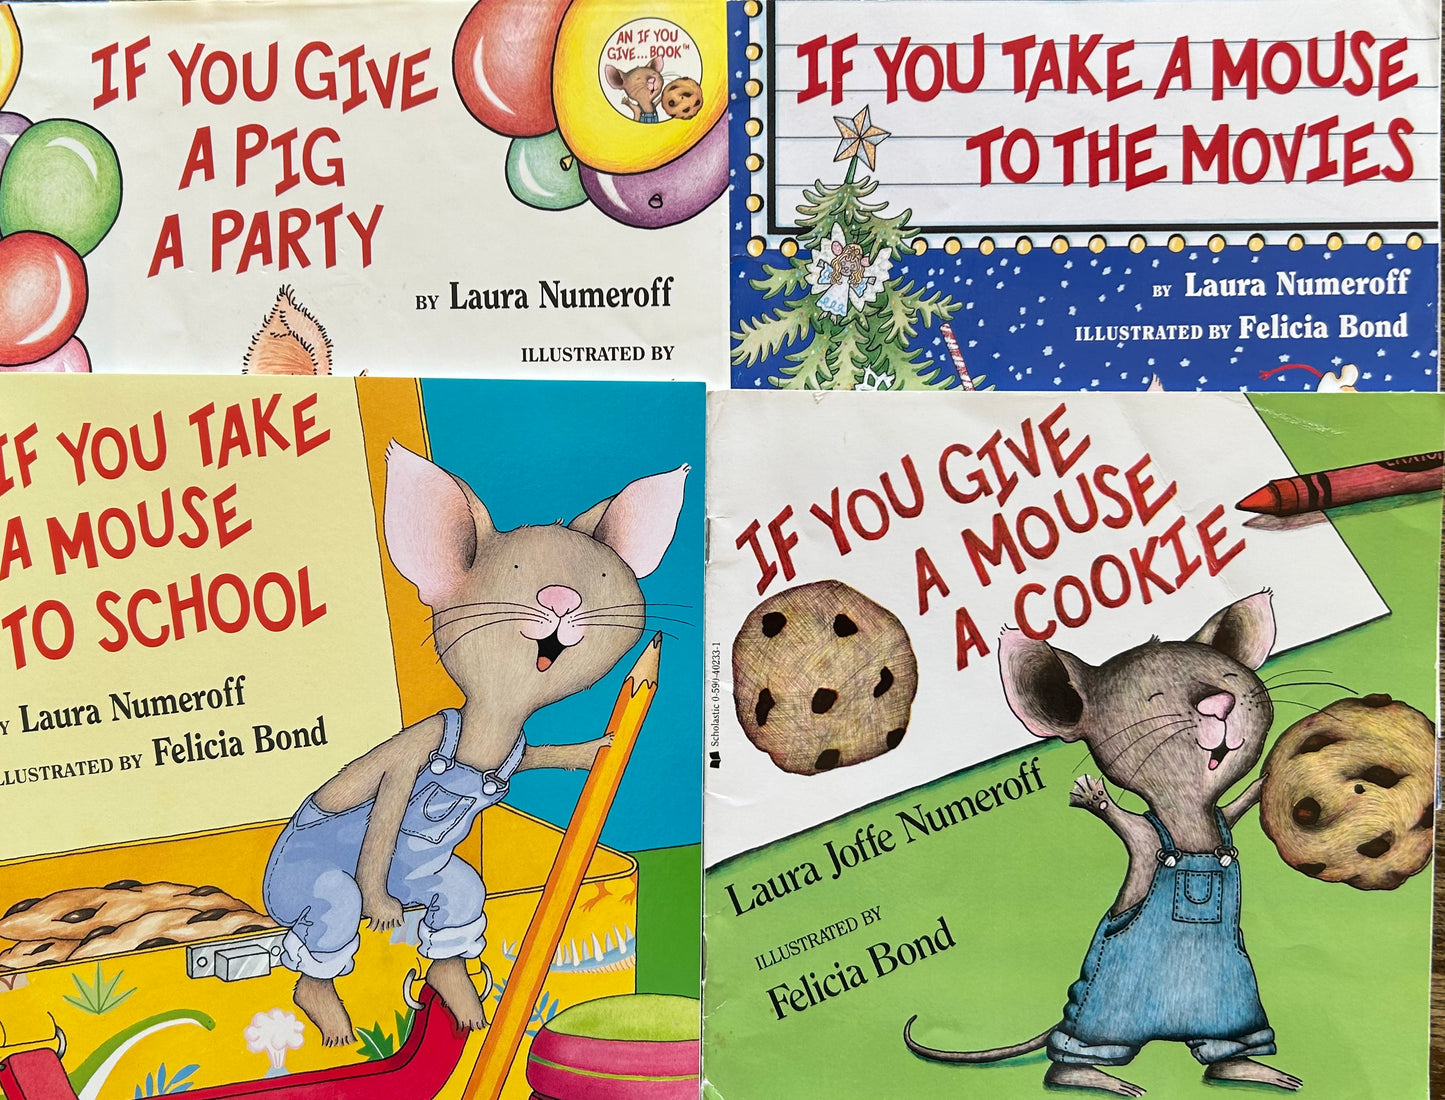 If You Take a Mouse Series By Laura Numeroff and Illustrated by Felicia Bond ( set of 5 books)